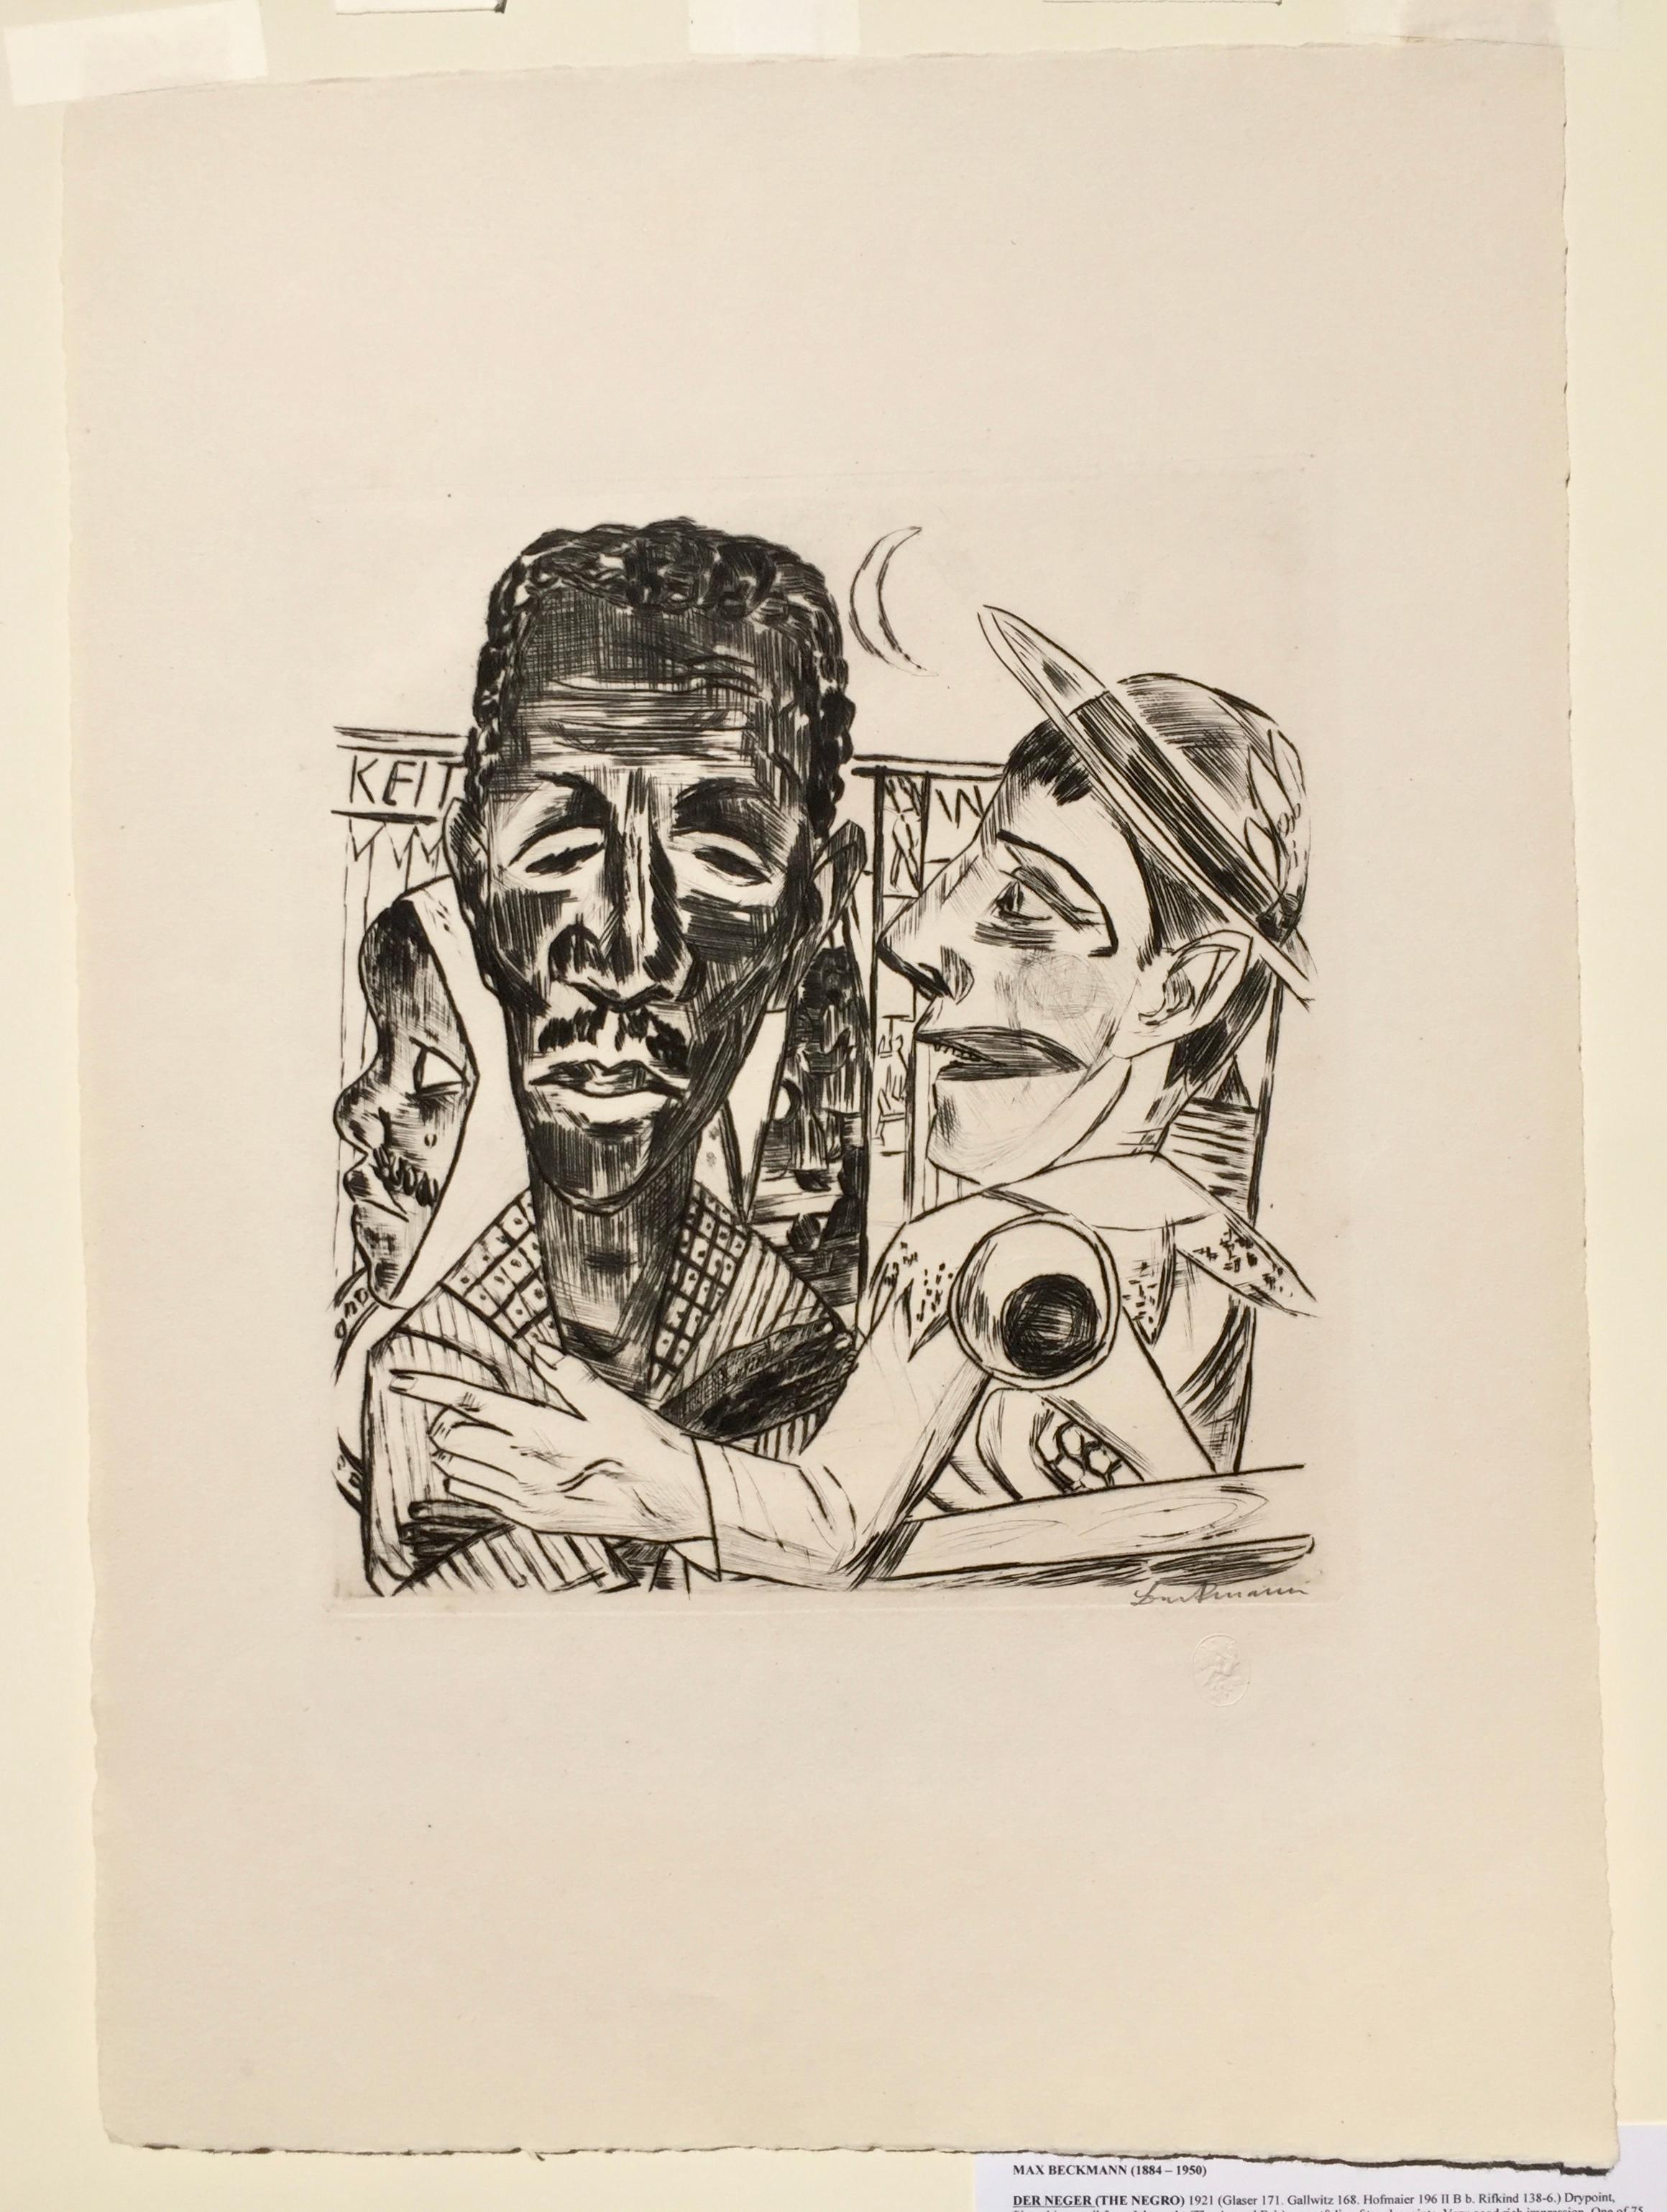 MAX BECKMANN (1884 – 1950)

DER NEGER (THE NEGRO) 1921 (Glaser 171. Gallwitz 168. Hofmaier 196 II B b. Rifkind 138 6.)
Drypoint, Signed in pencil from Jahrmarkt (The Annual Fair) . One from a portfolio of ten drypoints. Very good impression  On